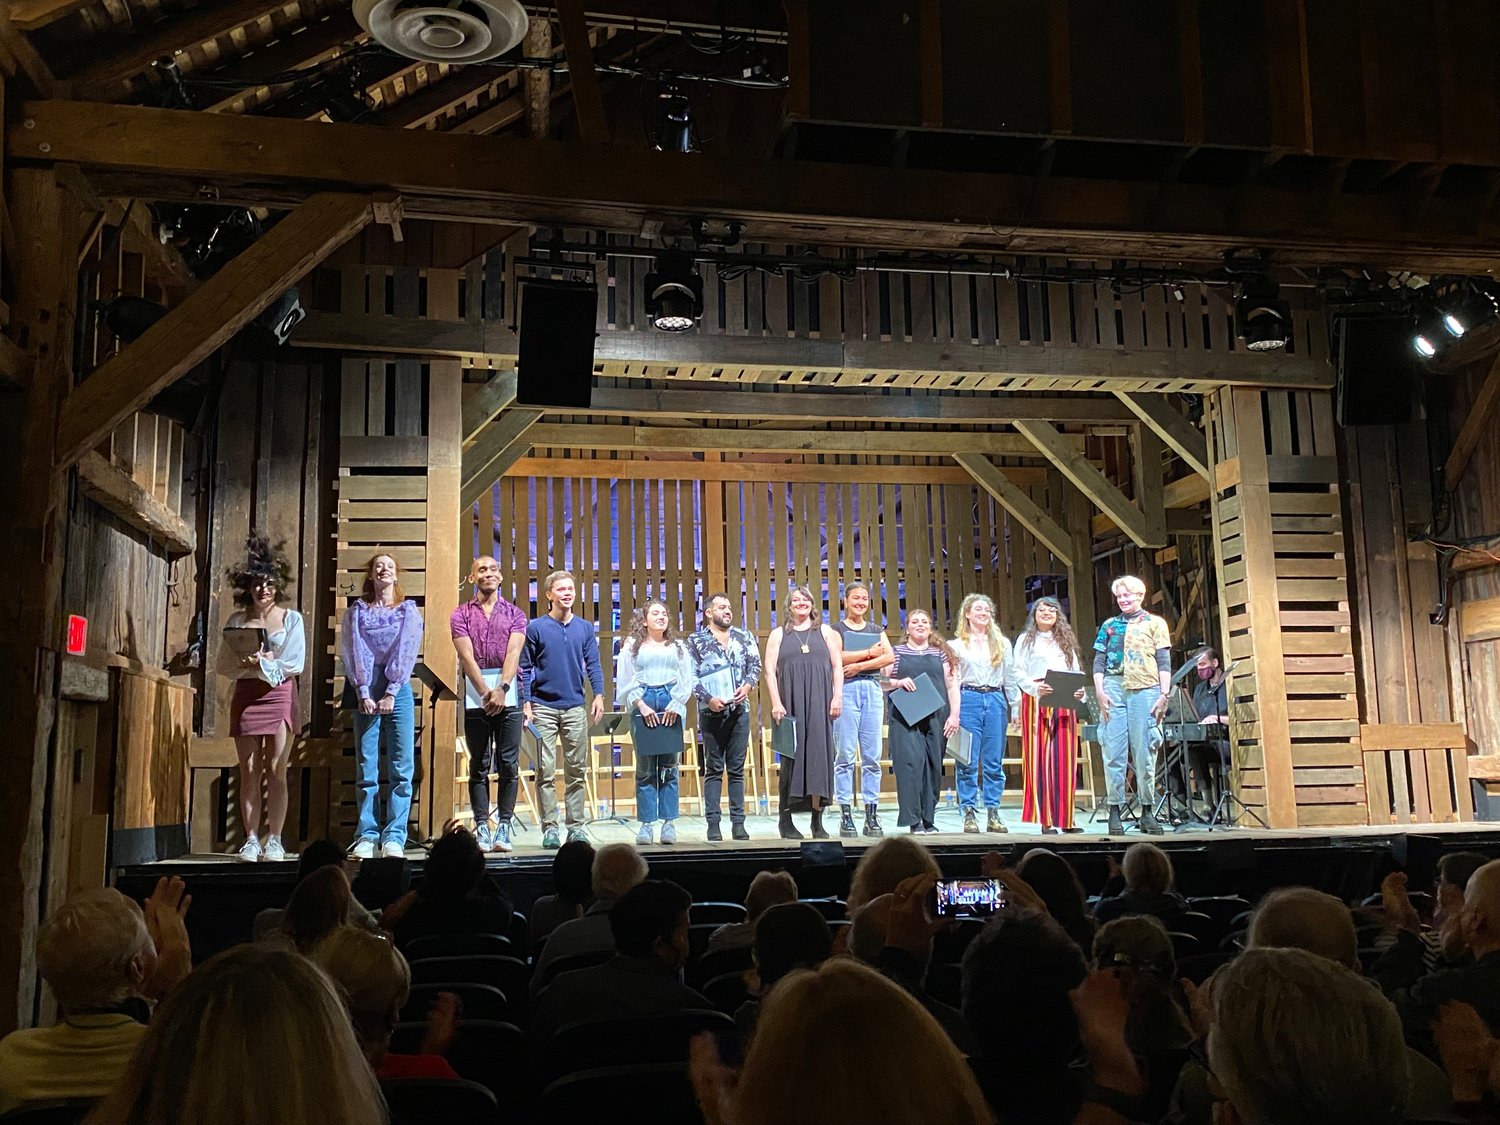 The cast of "By Any Other Name" takes a bow on the Main Stage.